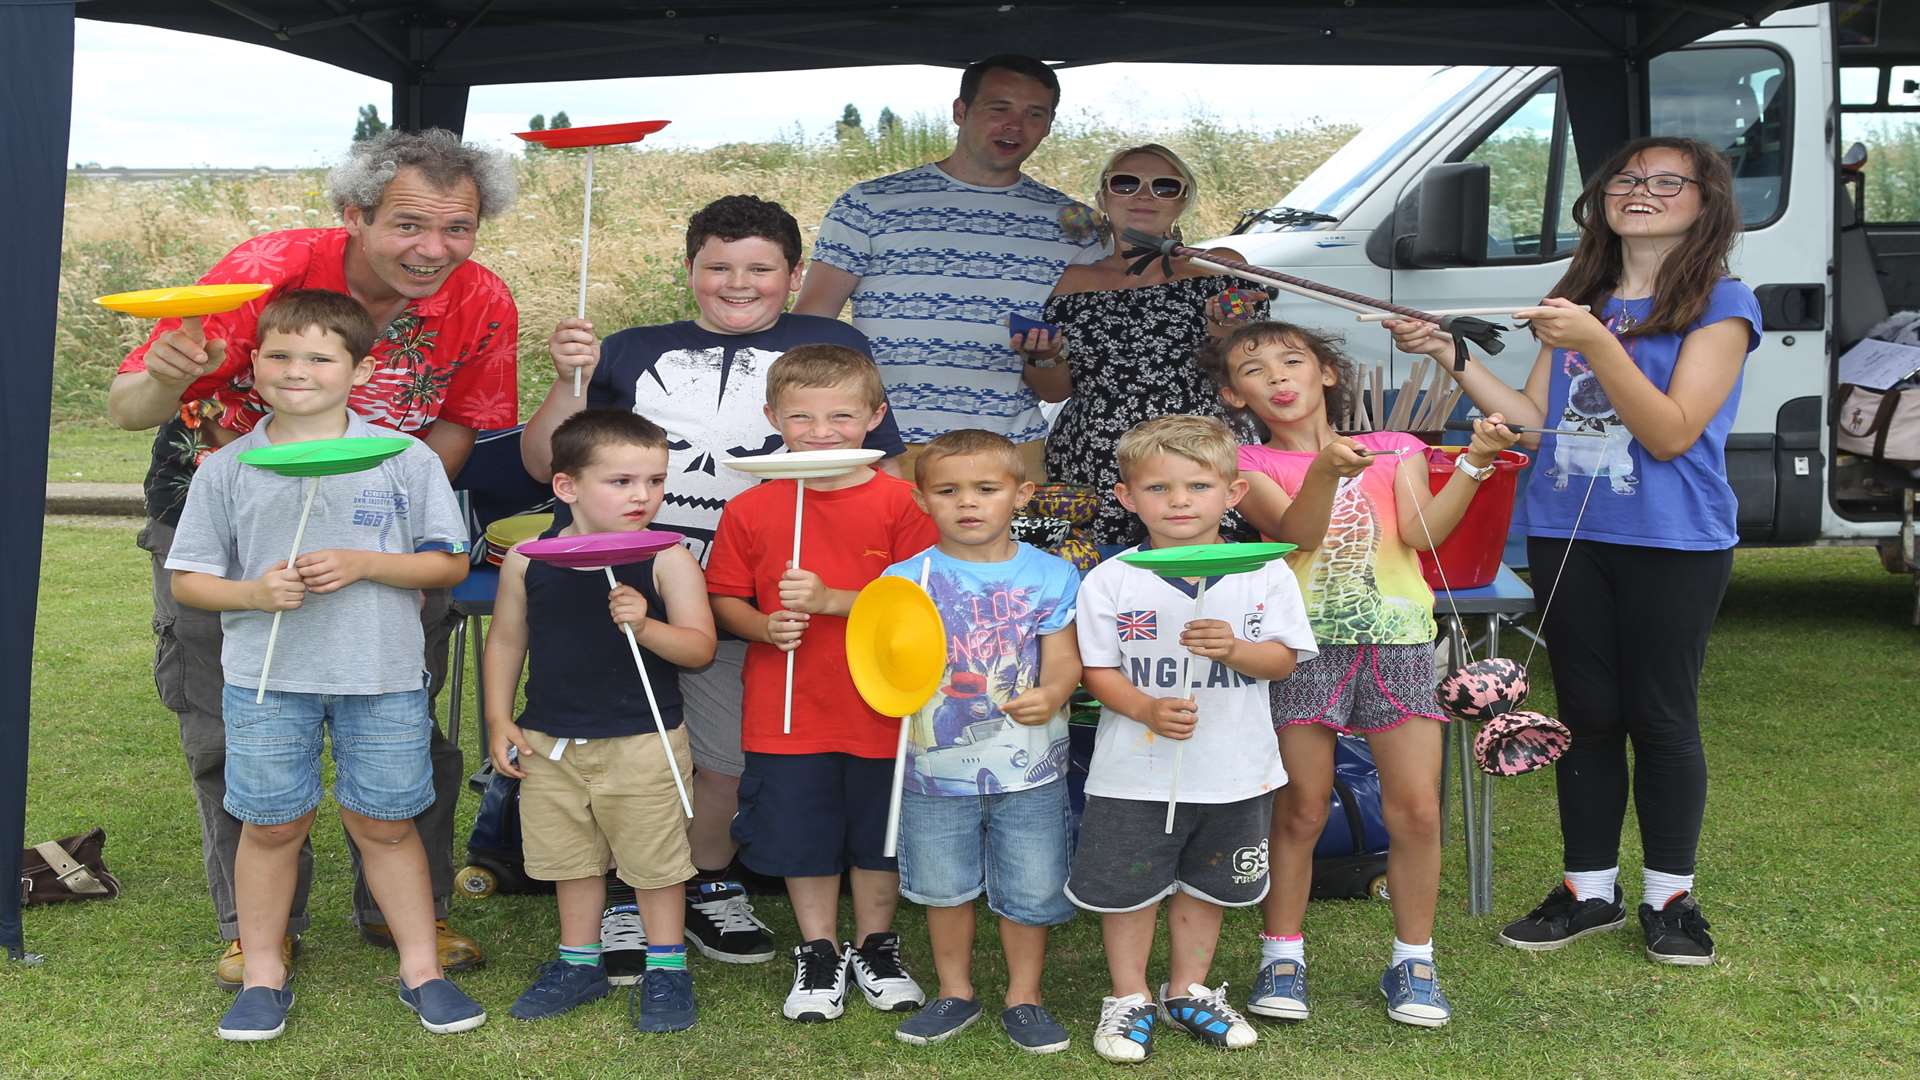 Tom from TK Arts left in red shirt with children with circus props at Milton Creek Country Park, in 2016